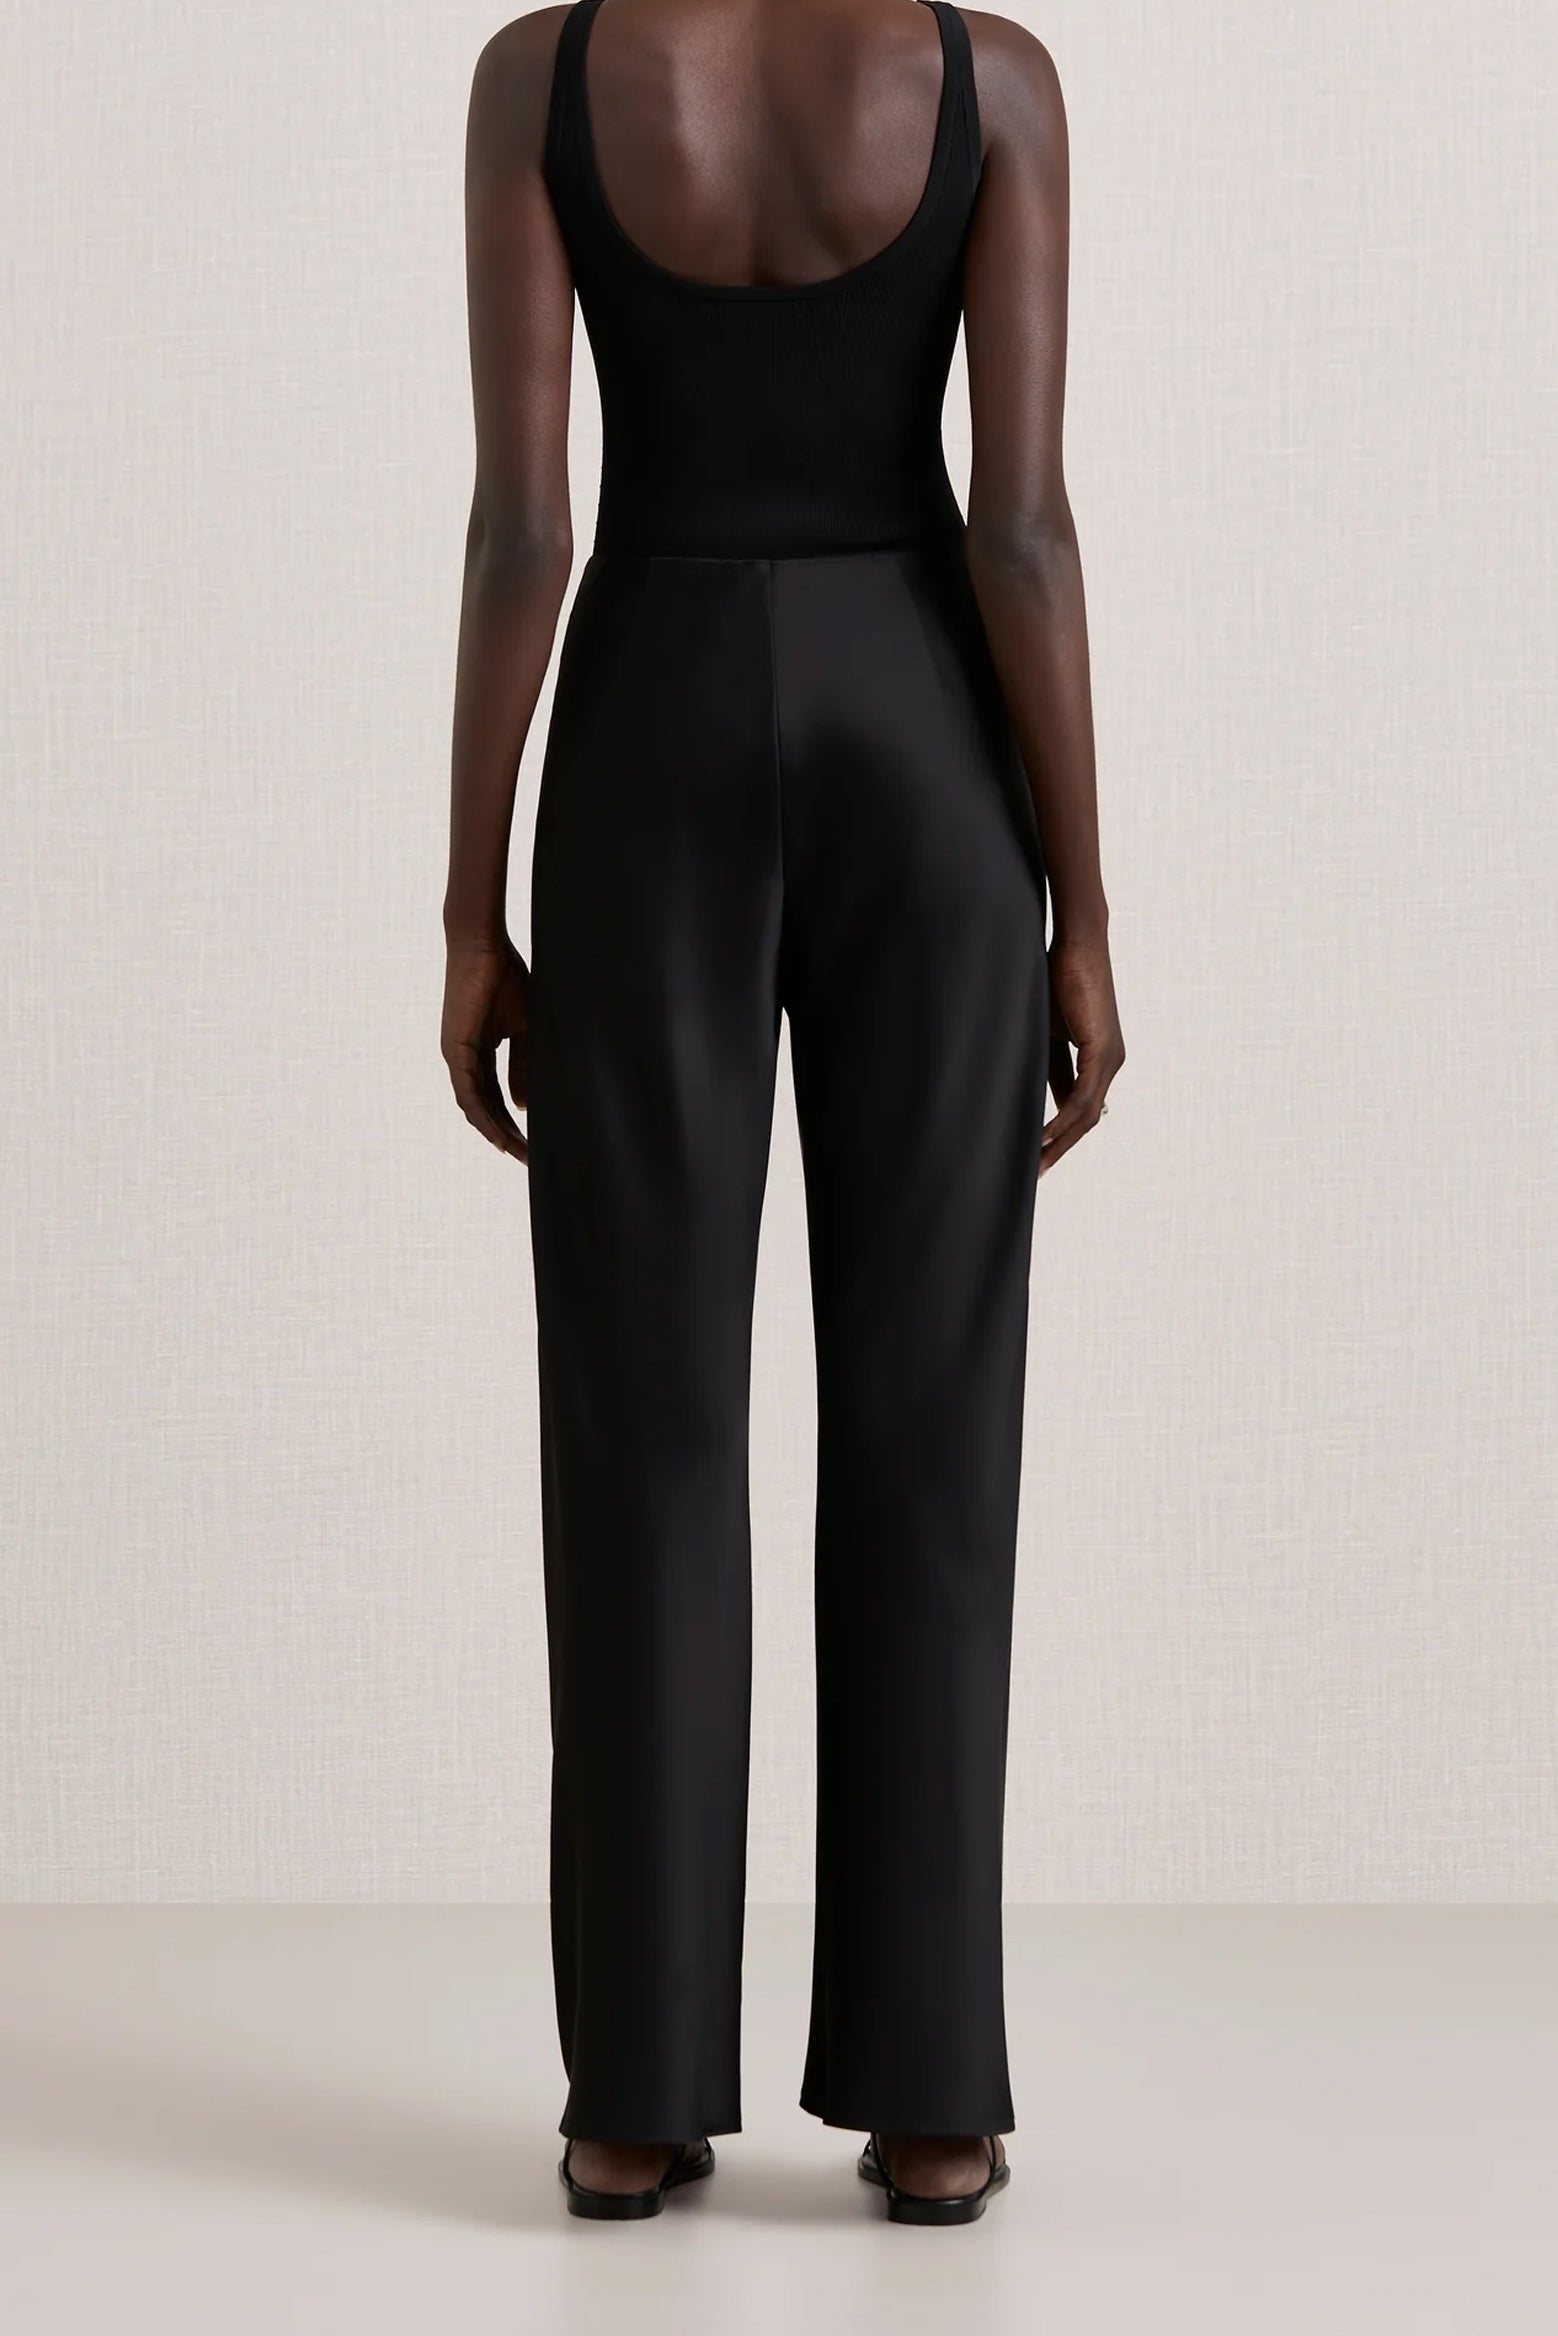 A.Emery Myrna Pant in Black available at The New Trend Australia.